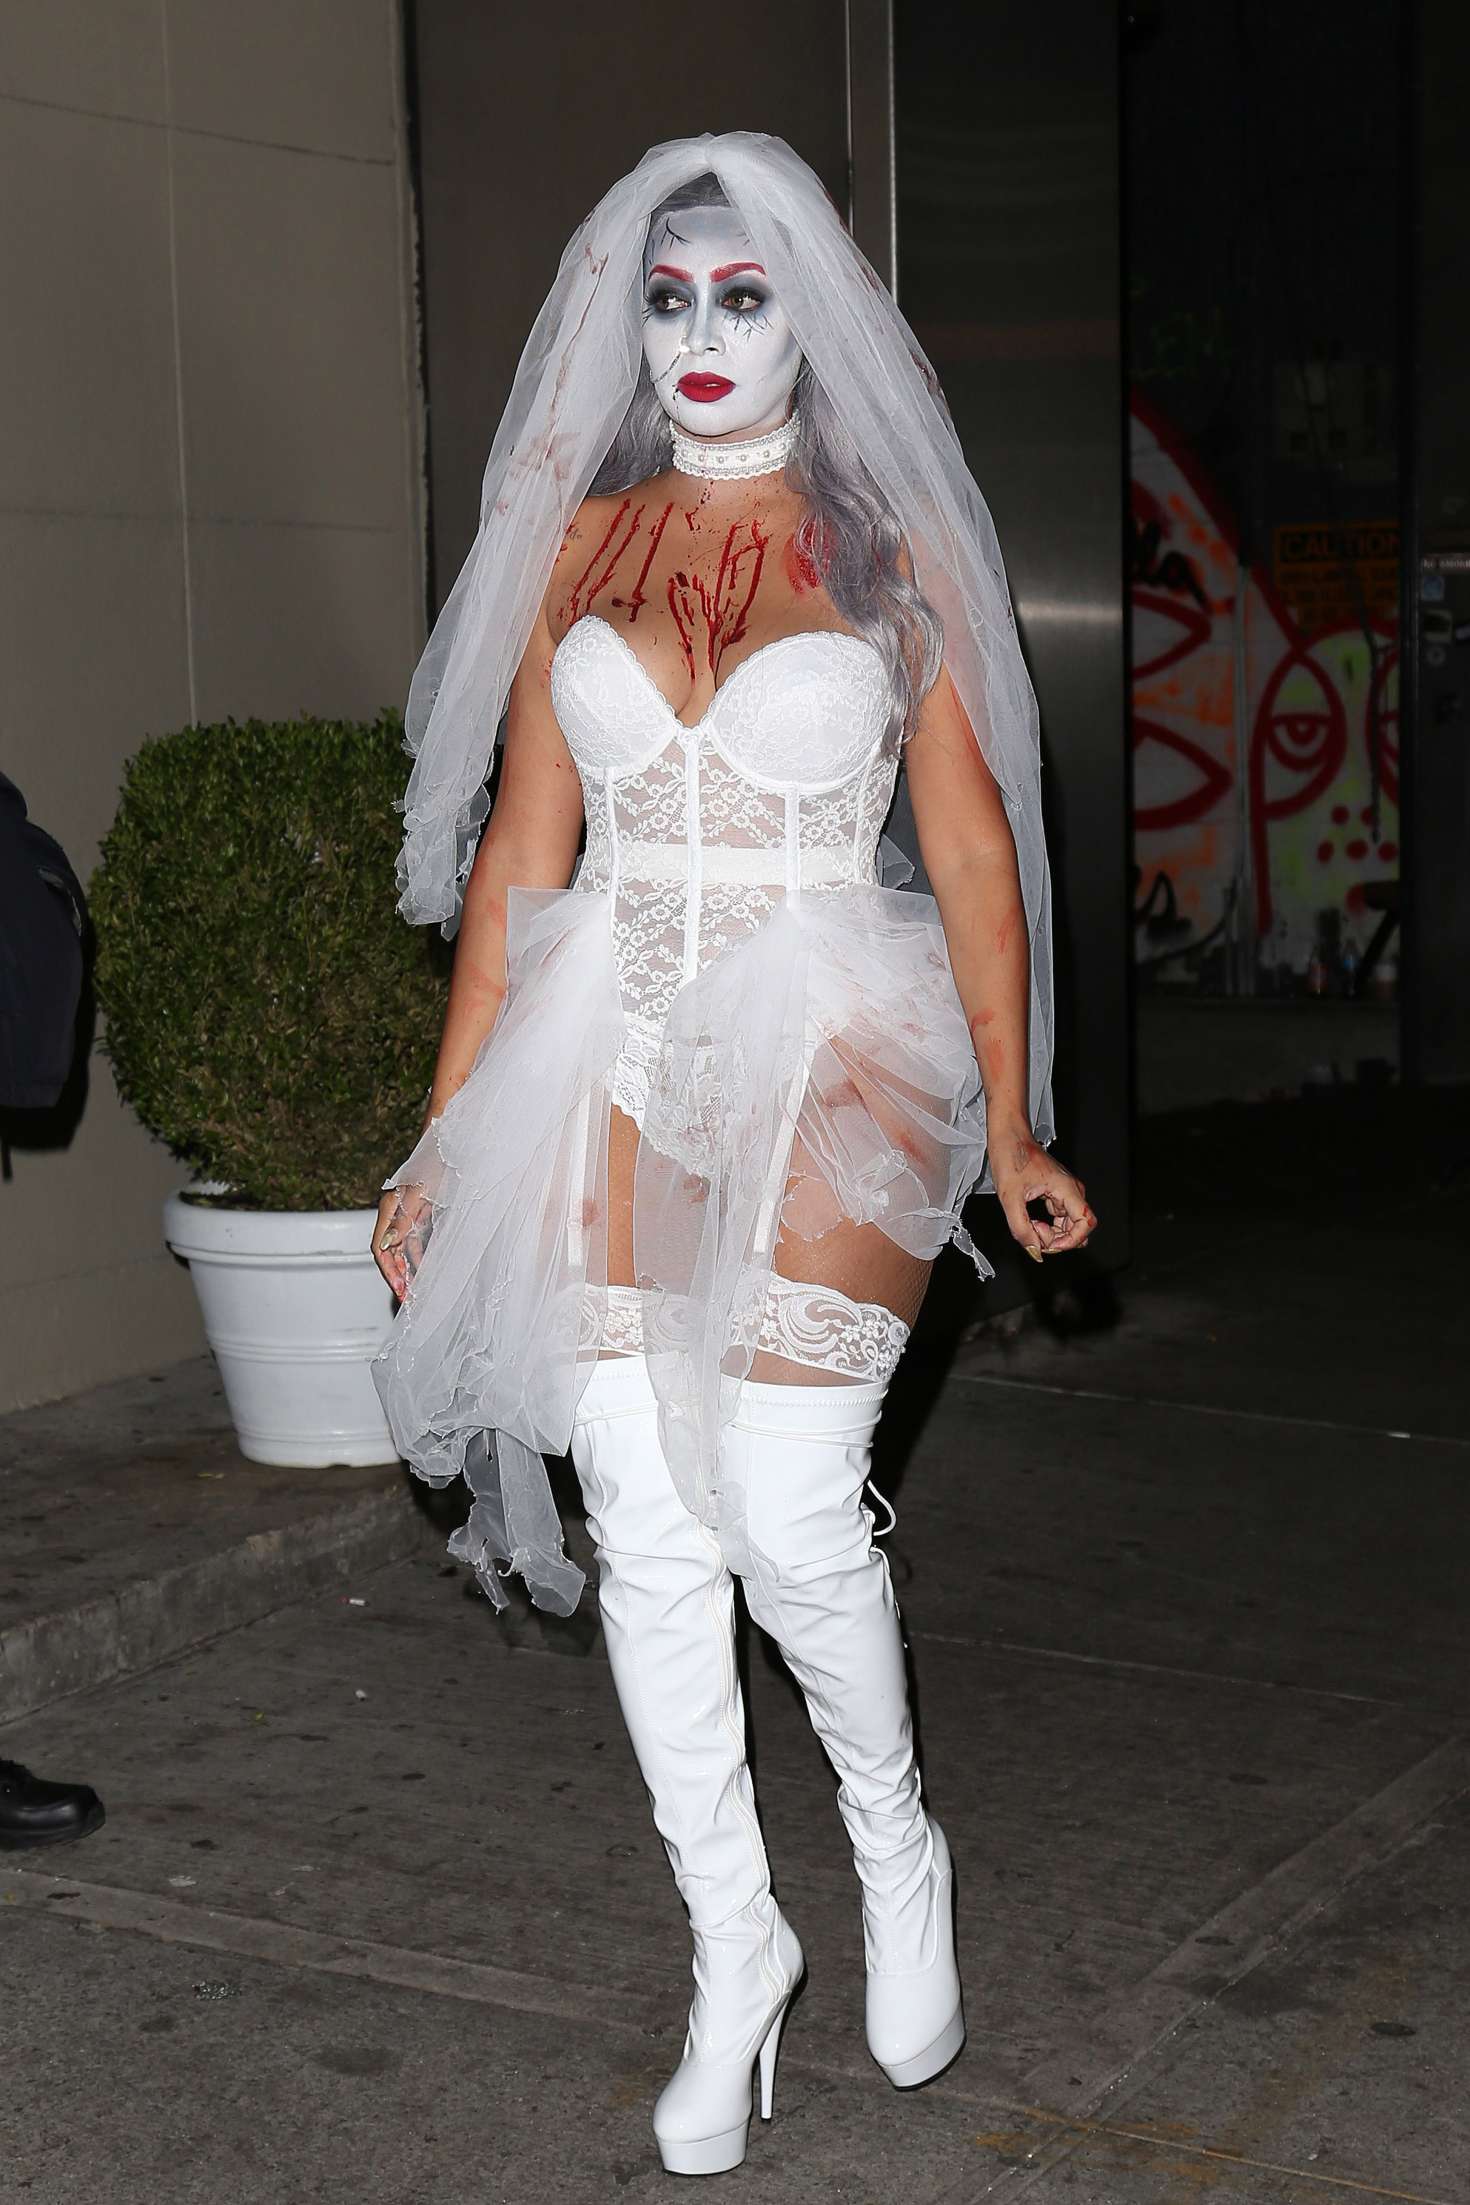 La La Anthony 2016 : La La Anthony at La La Anthony Halloween Party -01